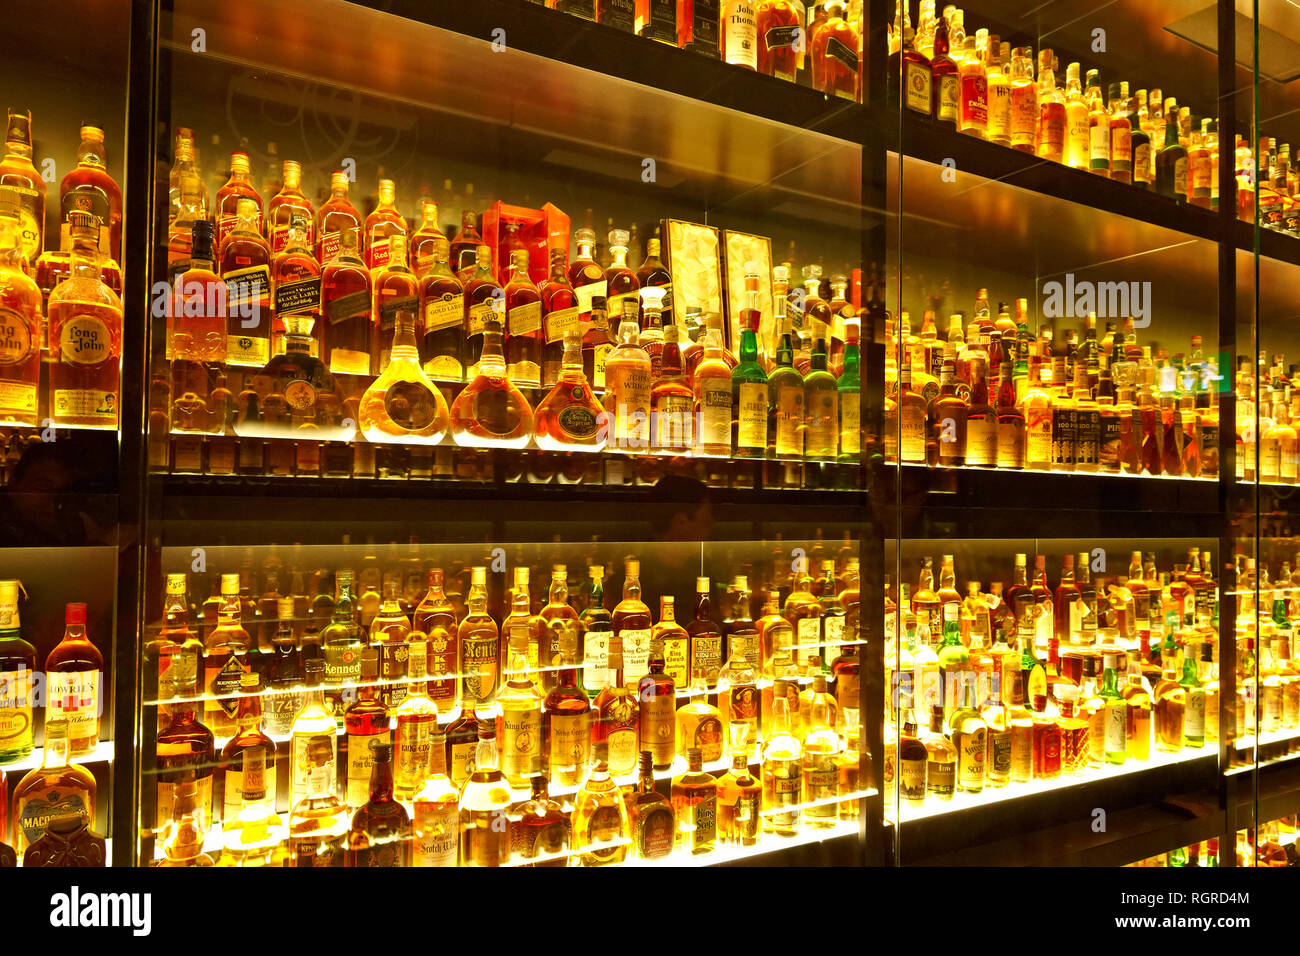 The largest Scotch Whisky collection in the world Stock Photo